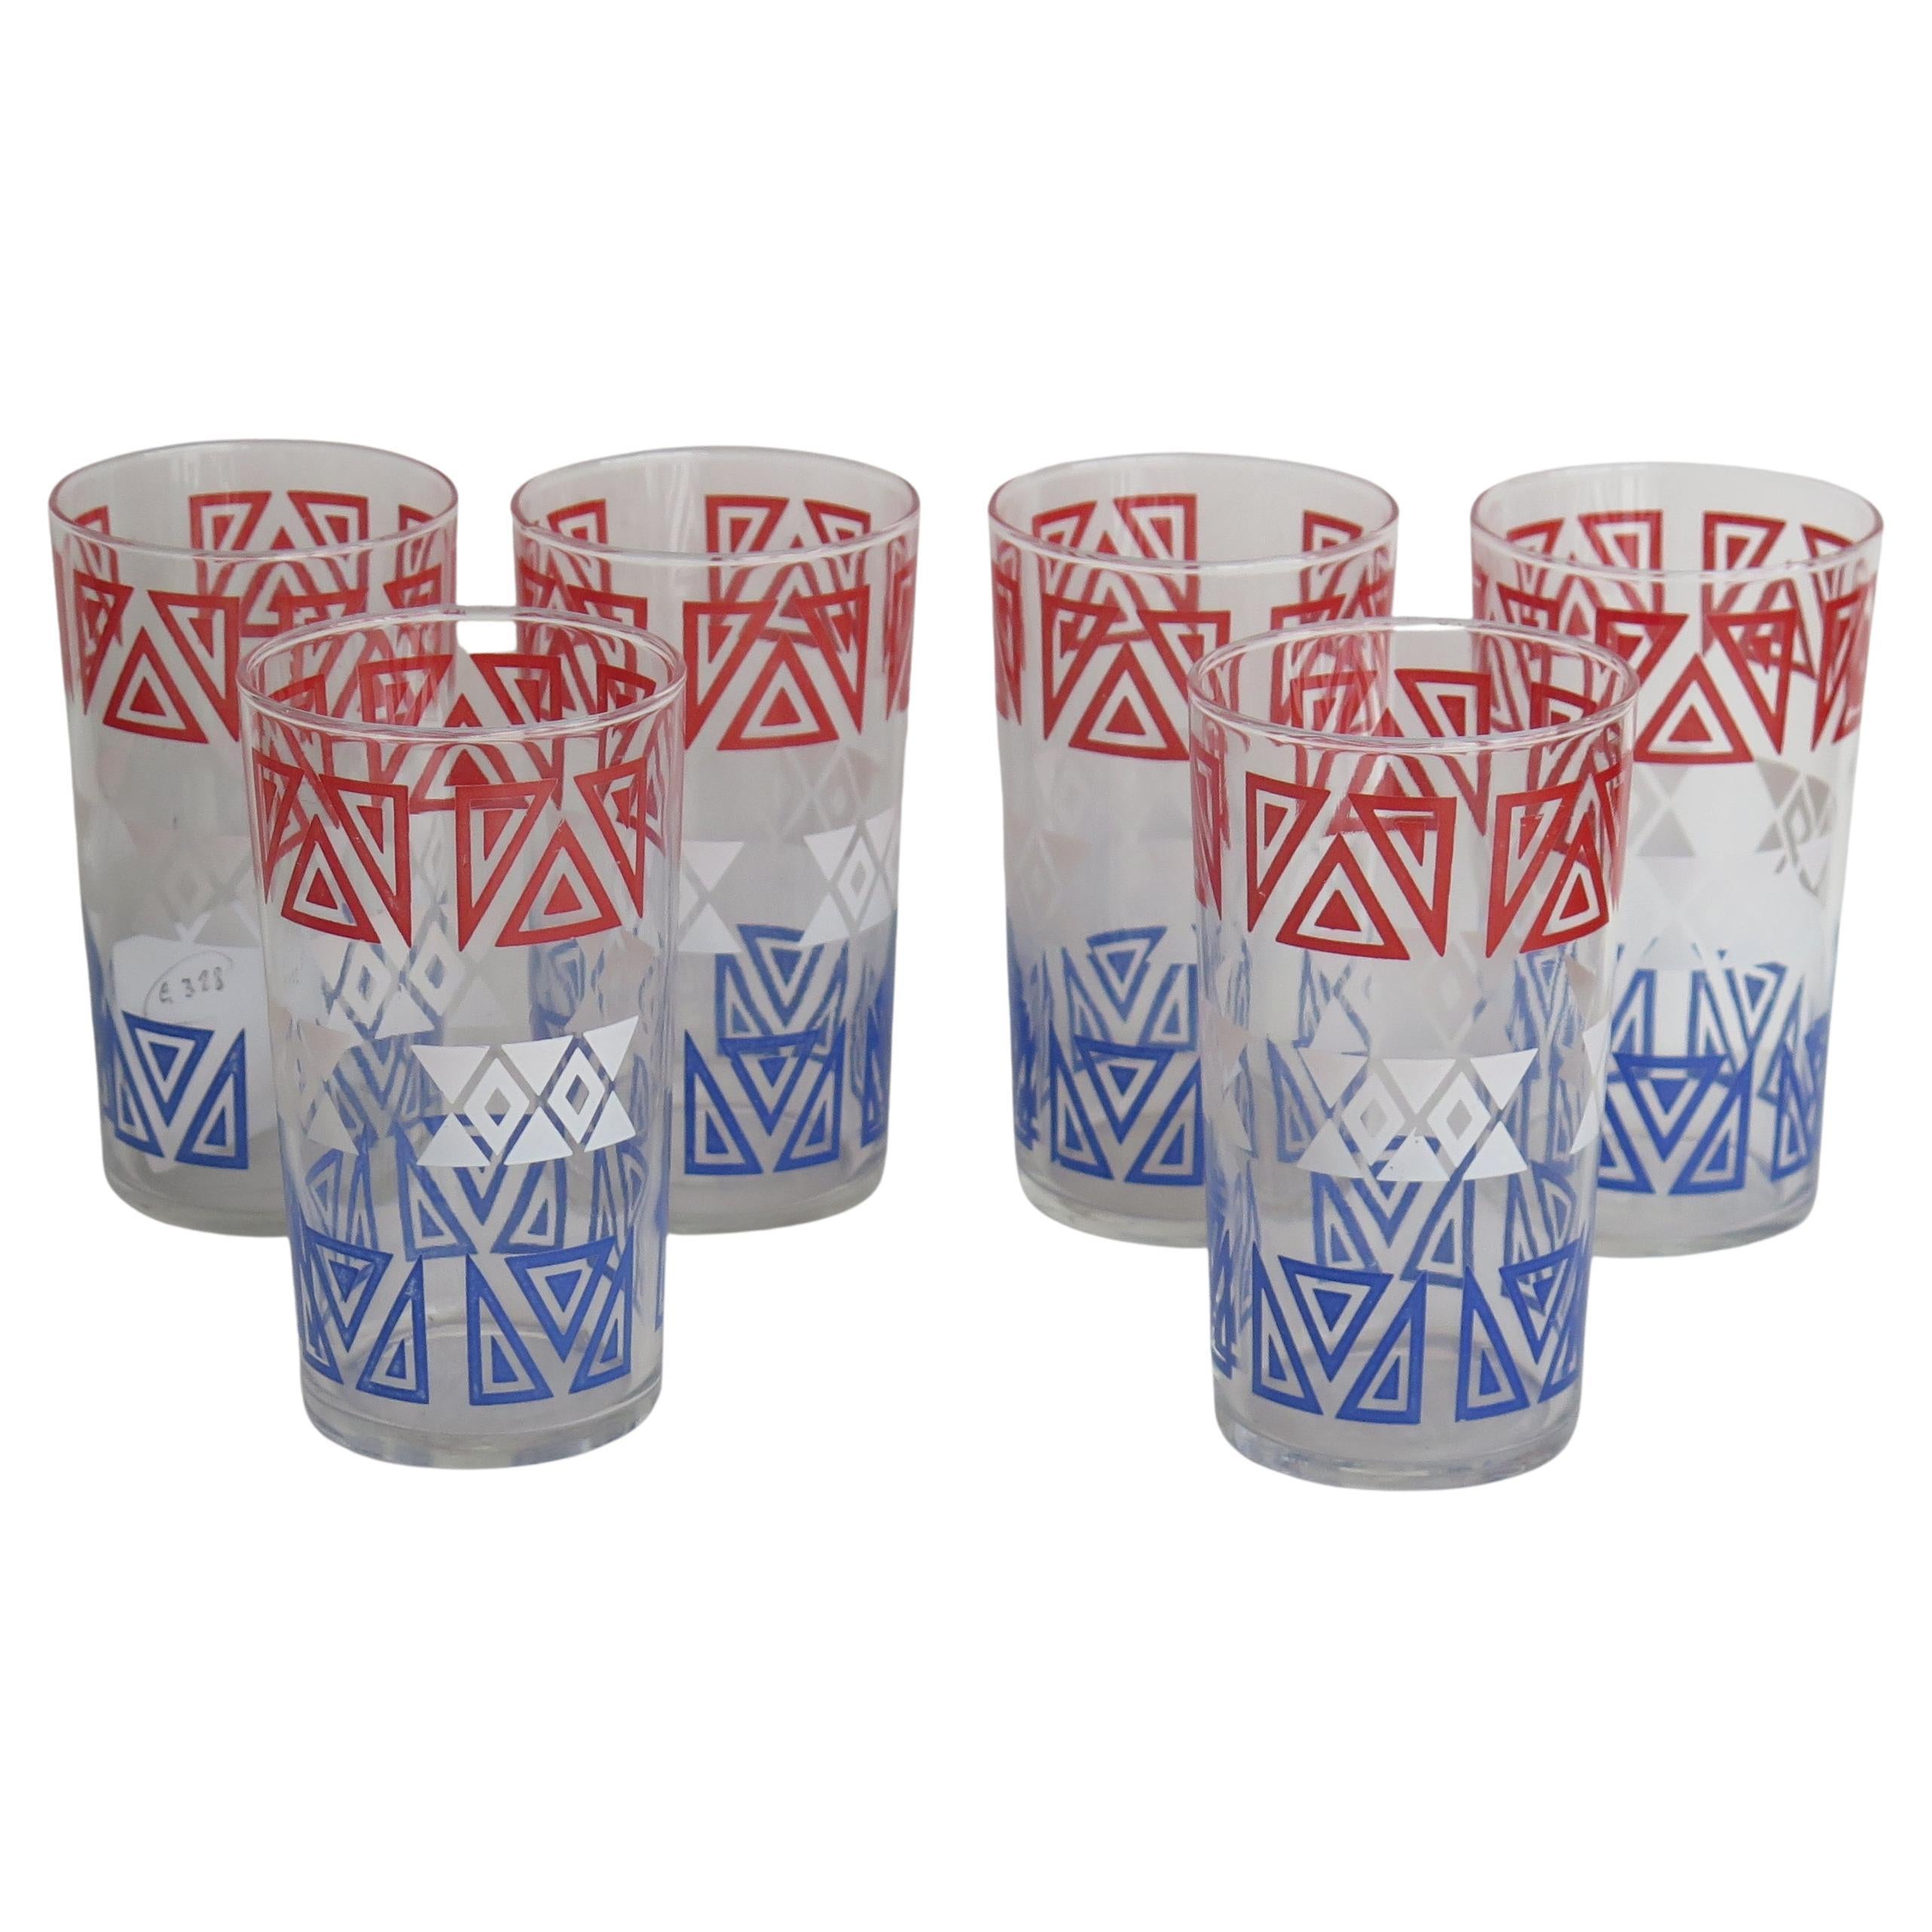 Set of Six Retro Glass Tumblers or Drinking Glasses, circa 1950s